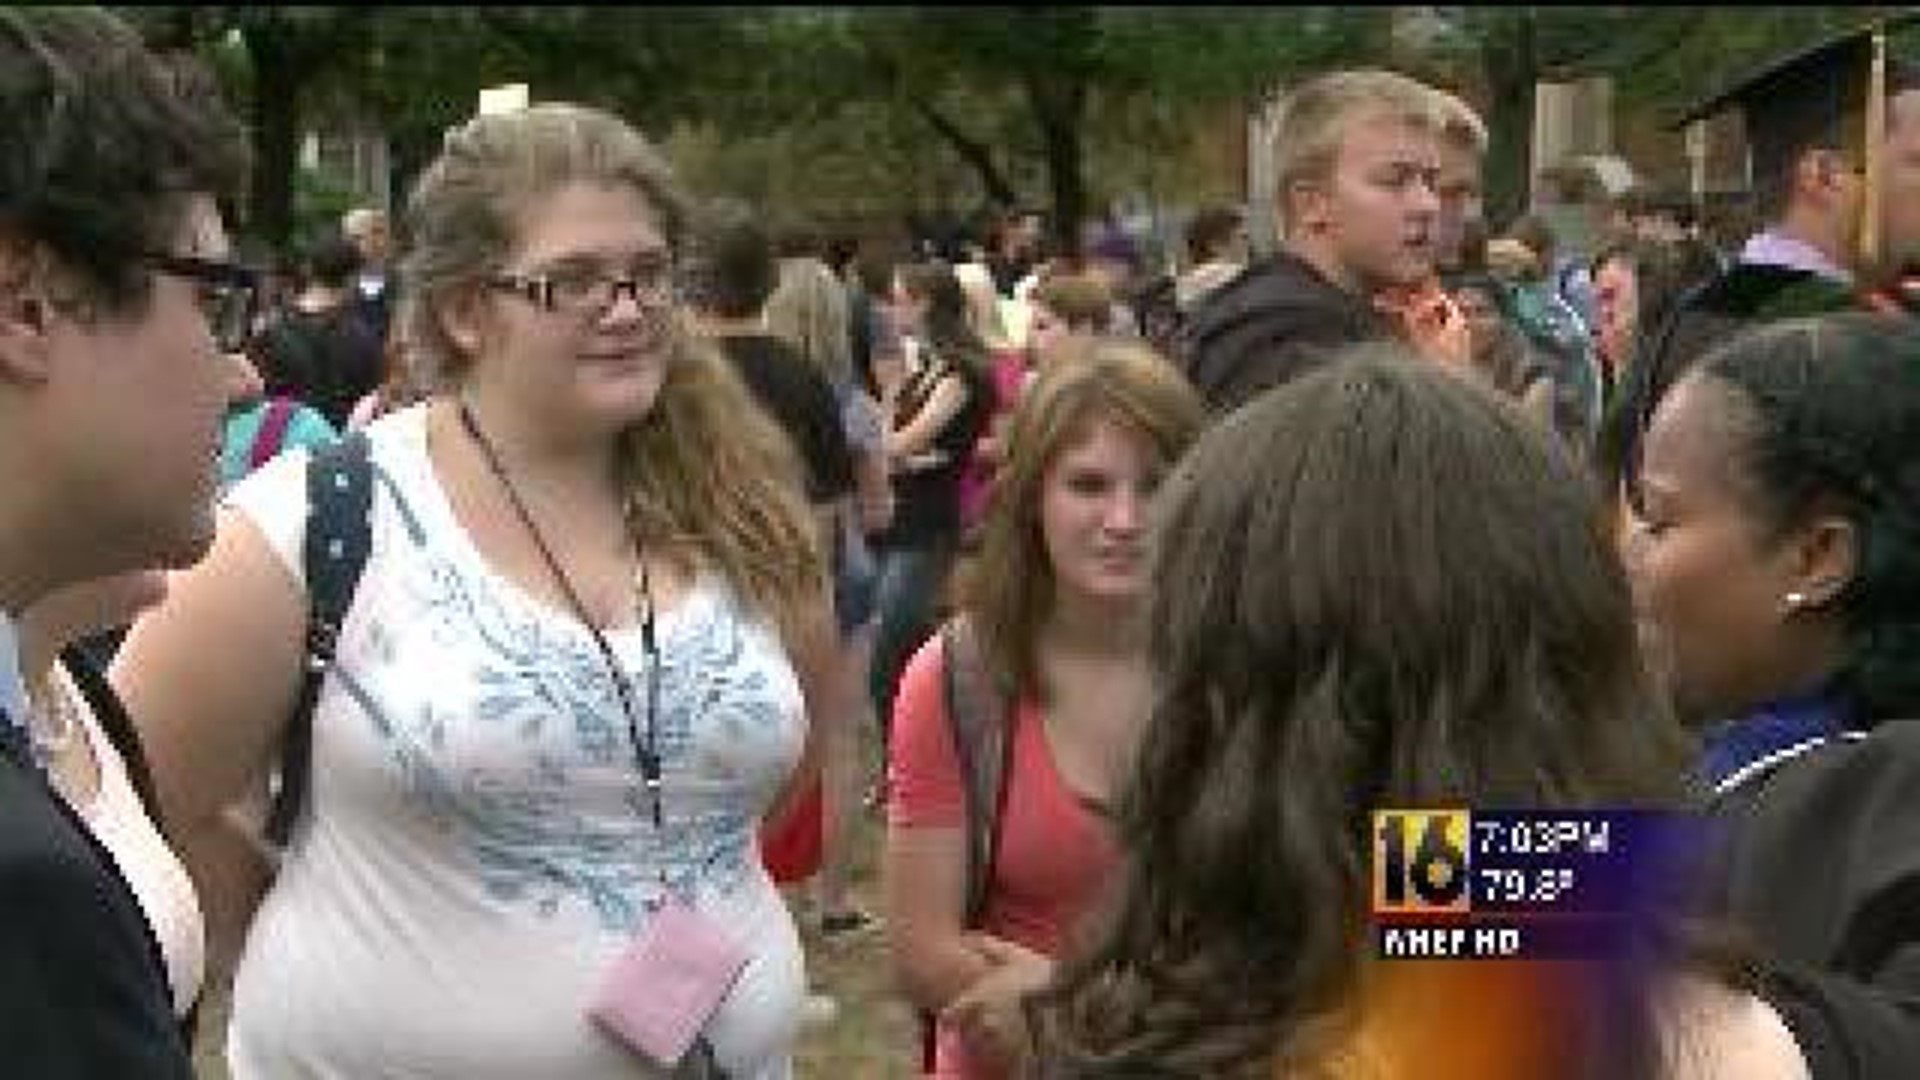 Freshmen Concerned About Crime in Wilkes-Barre